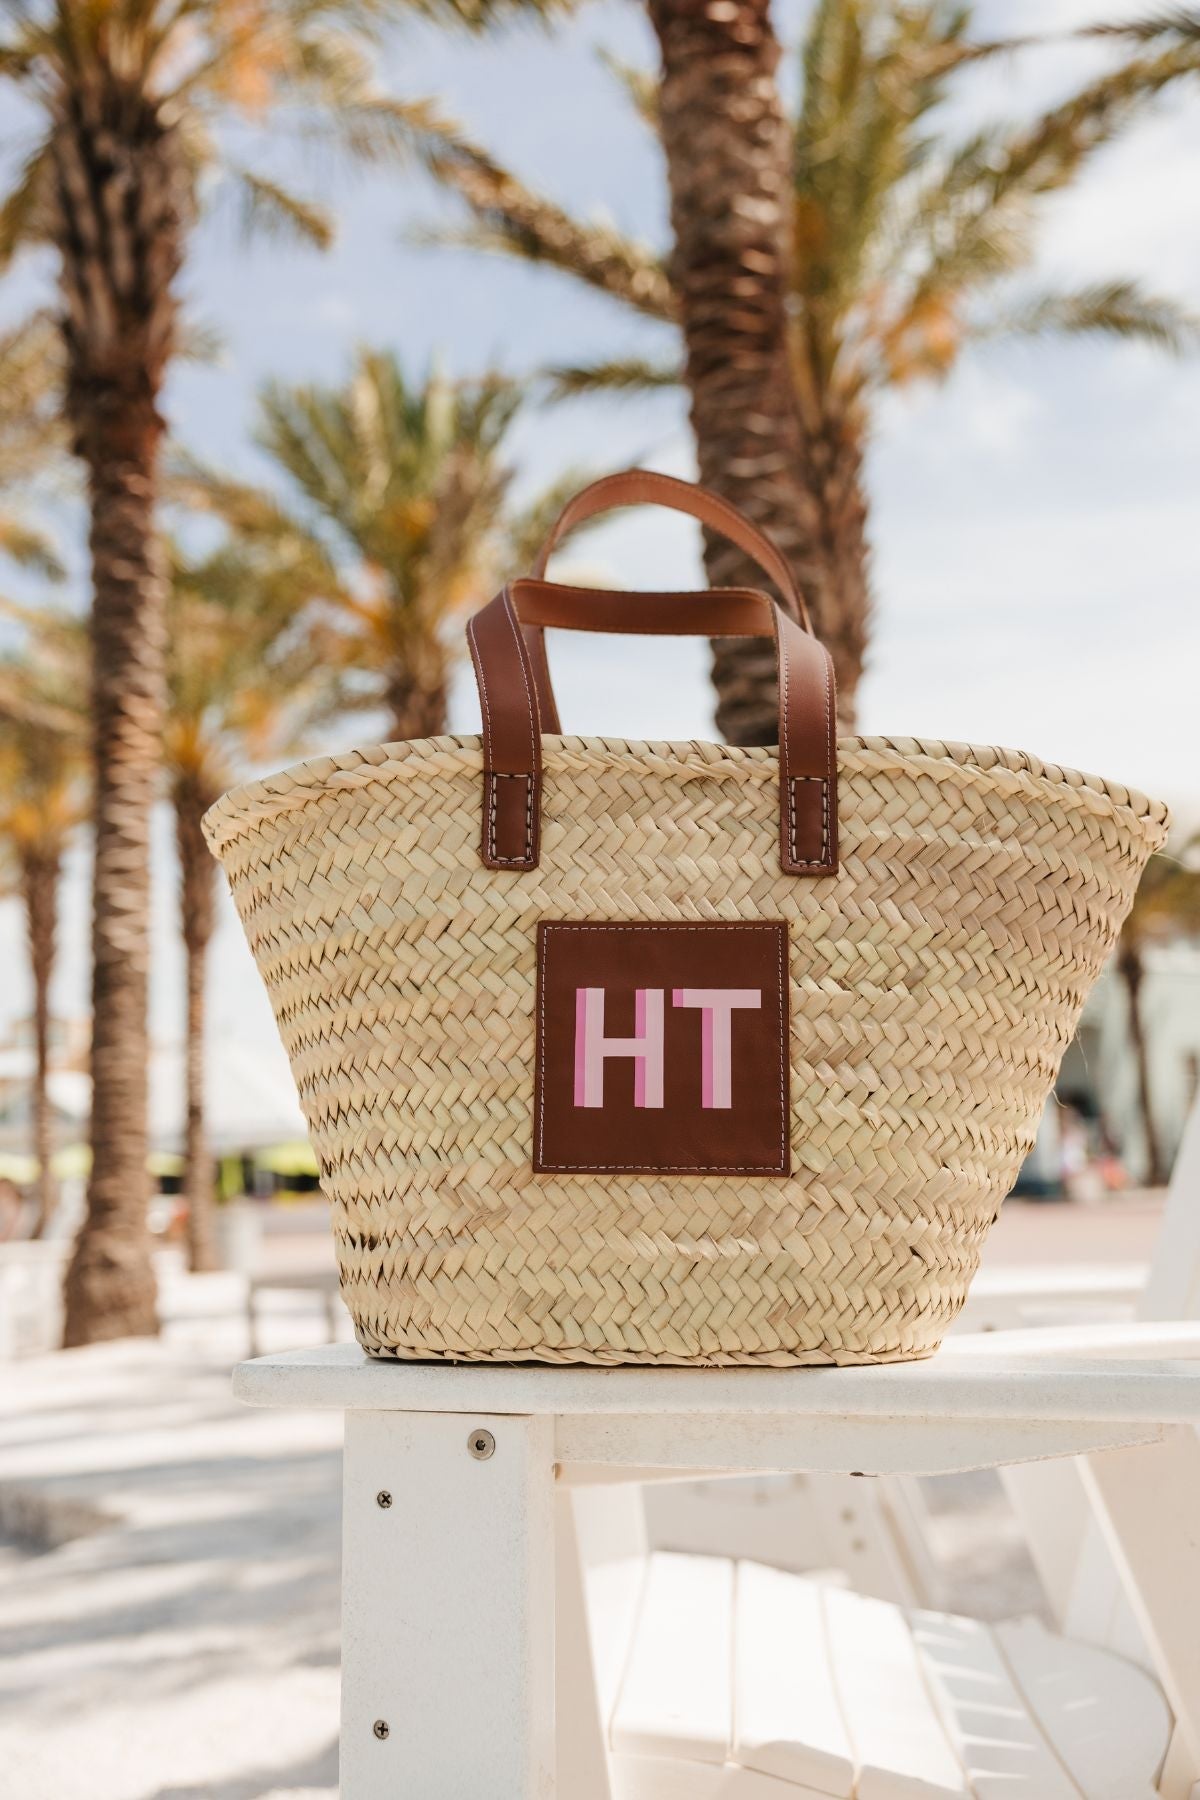 A straw tote is customized with a pink and orange monogram.